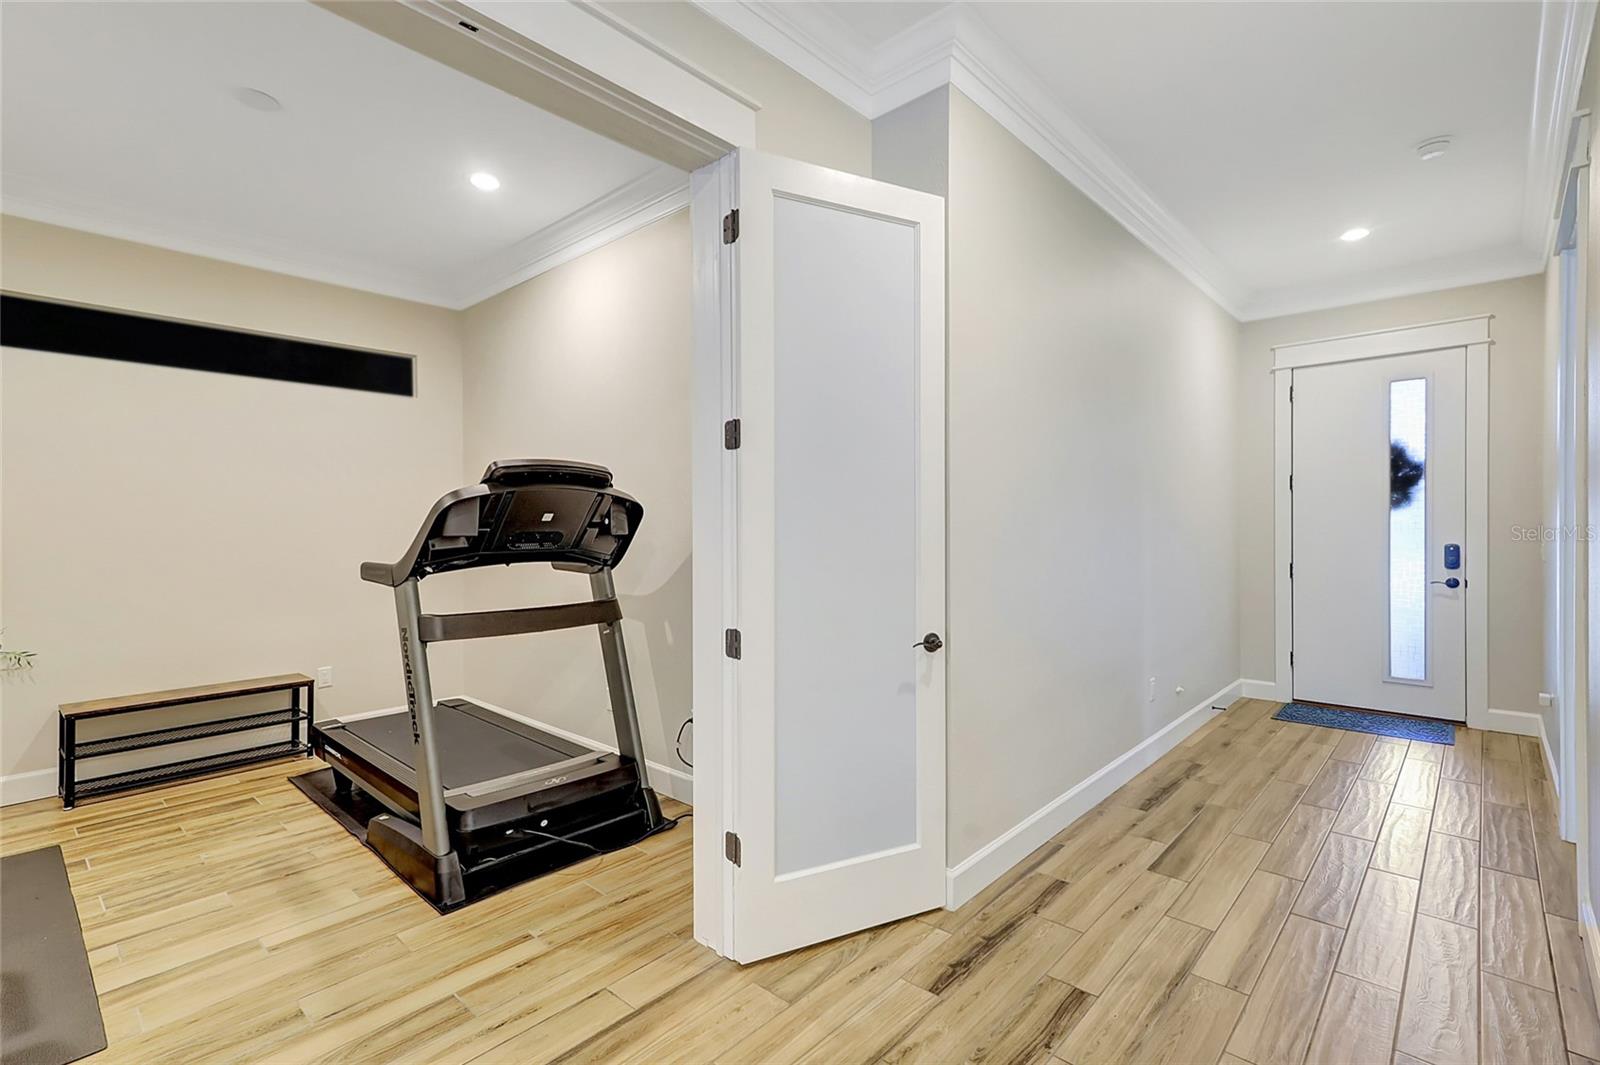 Office or home gym with opaque glass double doors